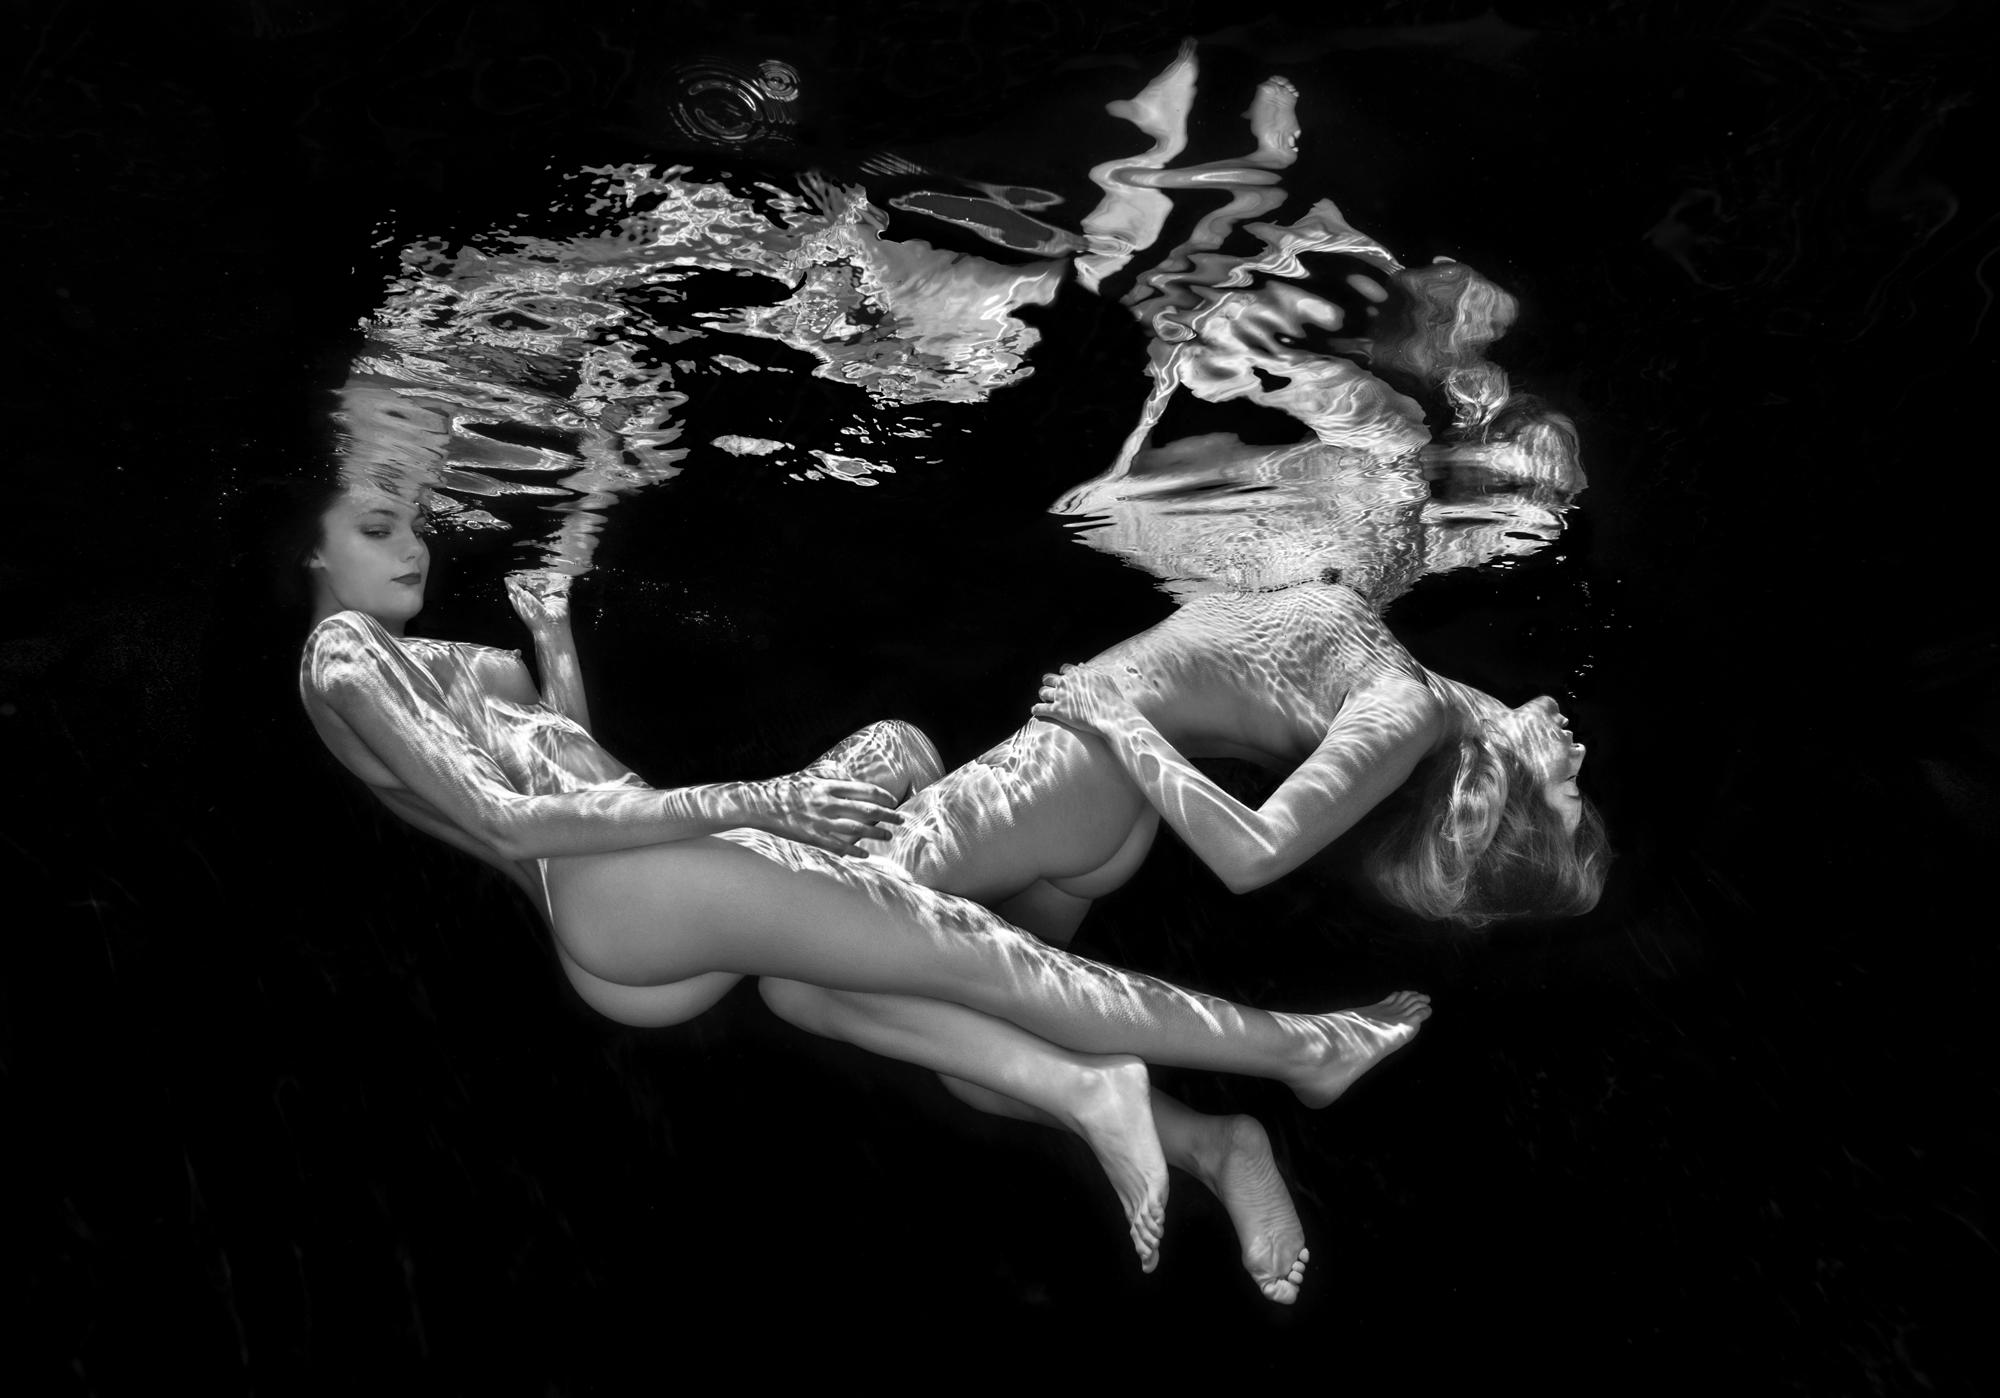 Alex Sher Nude Photograph - Double Trouble - underwater black & white nude photograph - paper print 17 x 24"